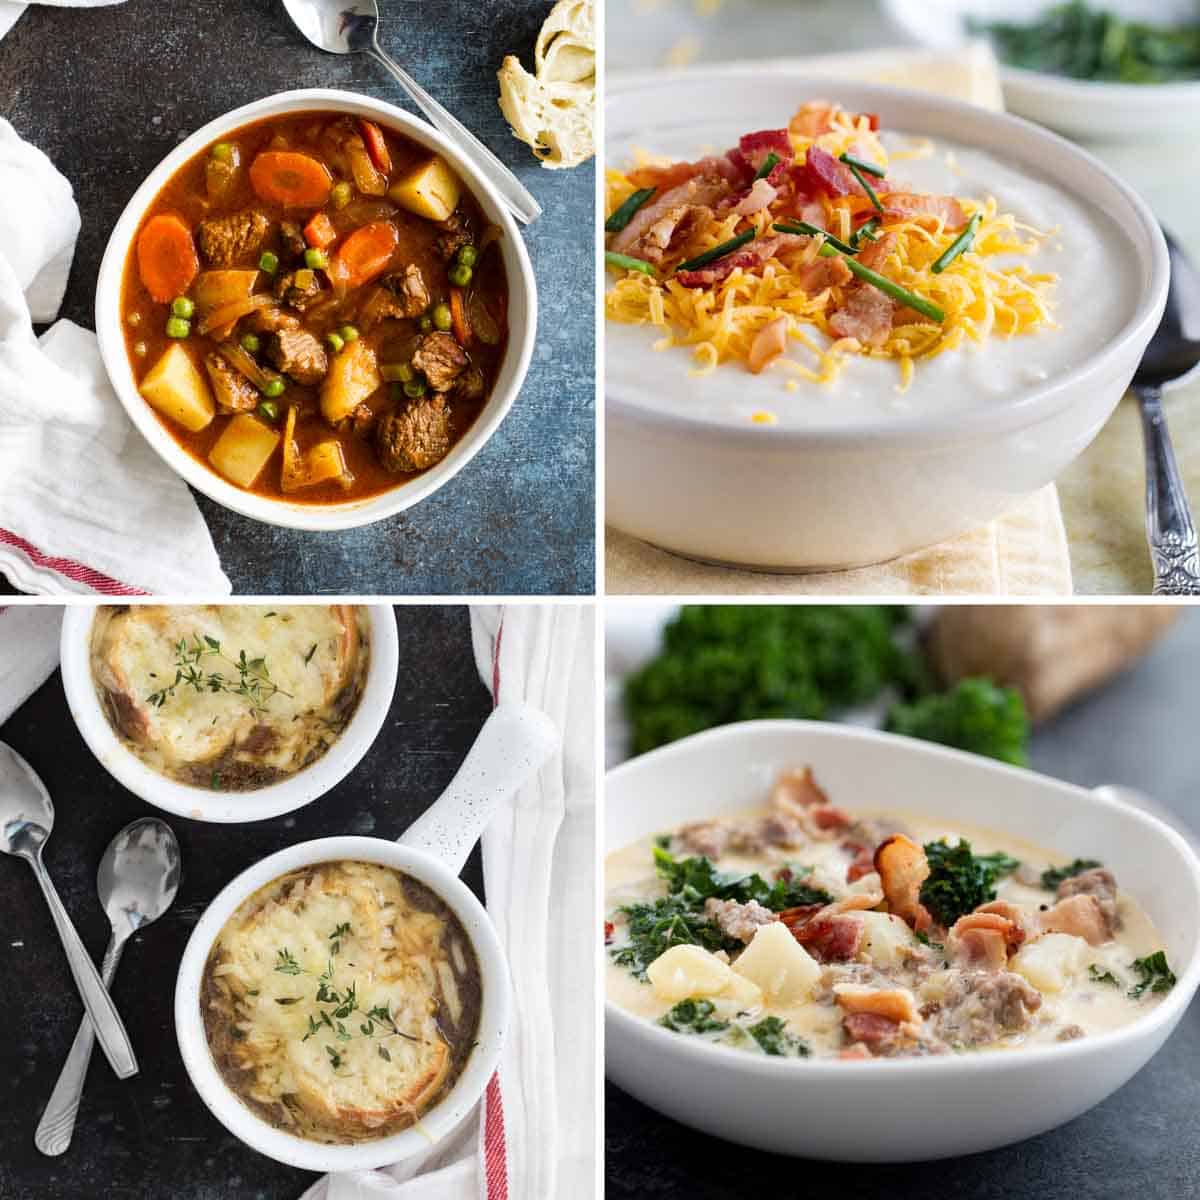 Pictures of Zuppa Toscana, French Onion Soup, Beef Stew, and Potato Soup.